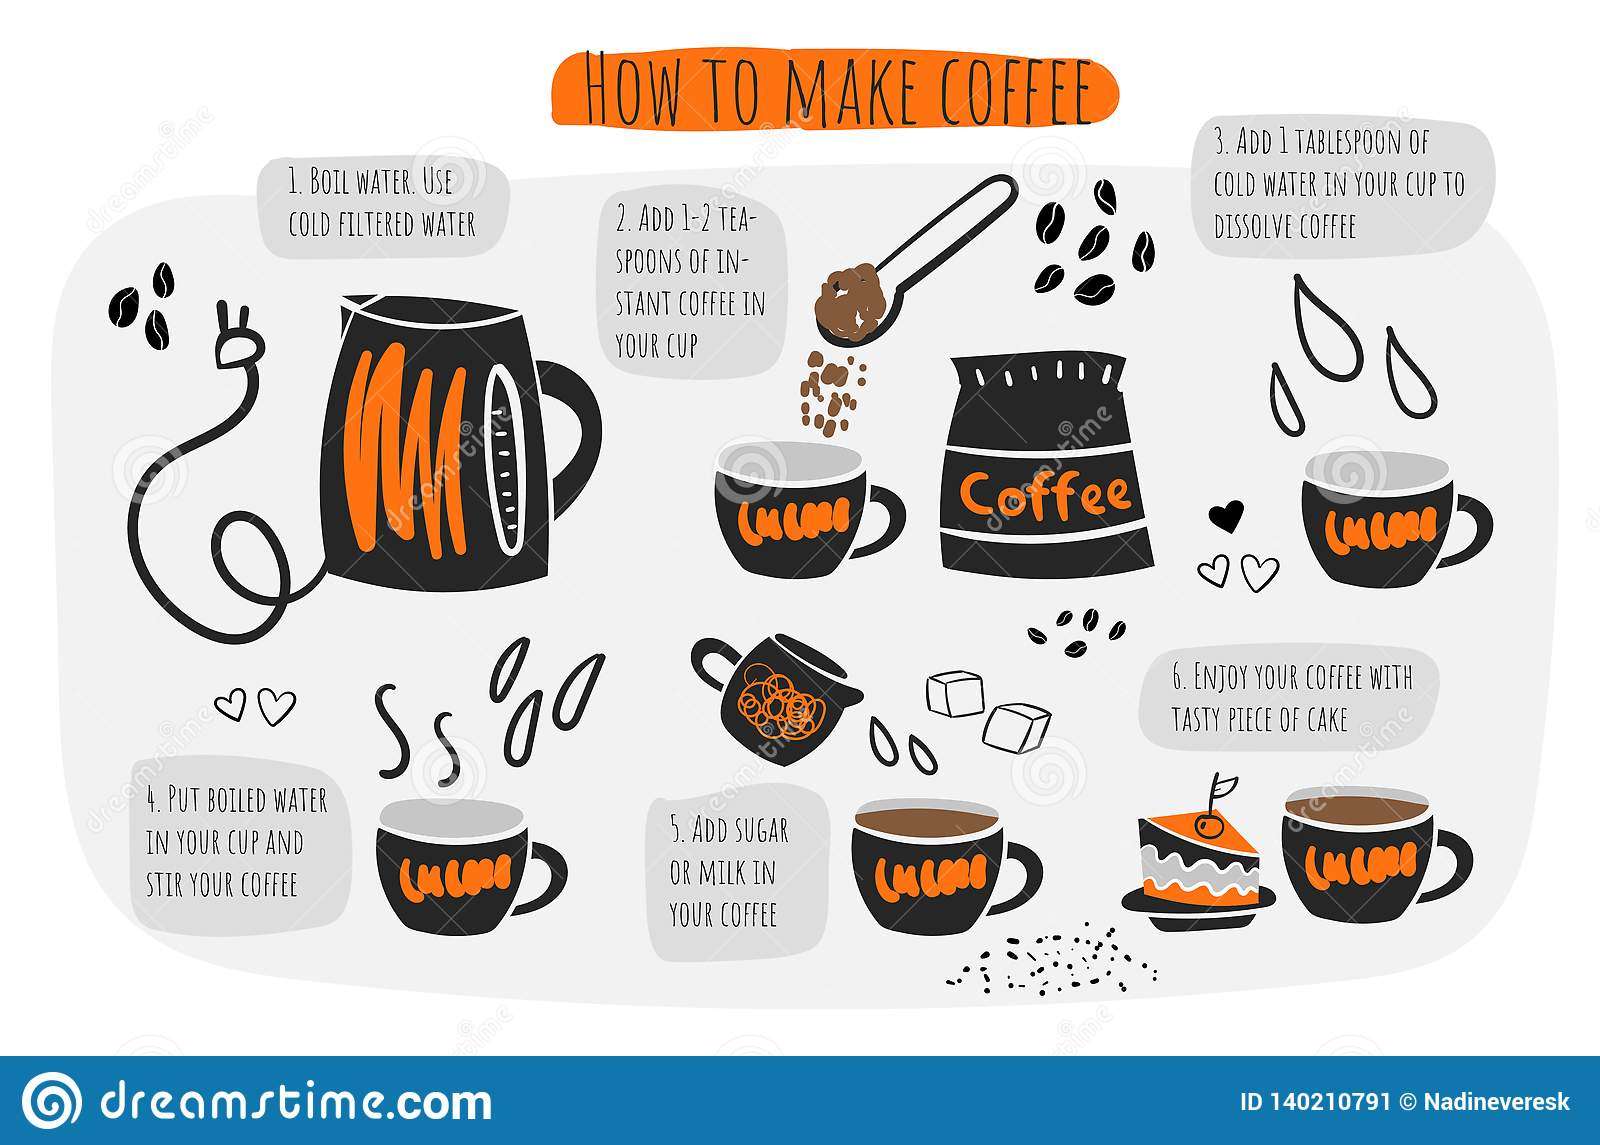 How To Make Coffee Infographic, Instructions, Steps ...